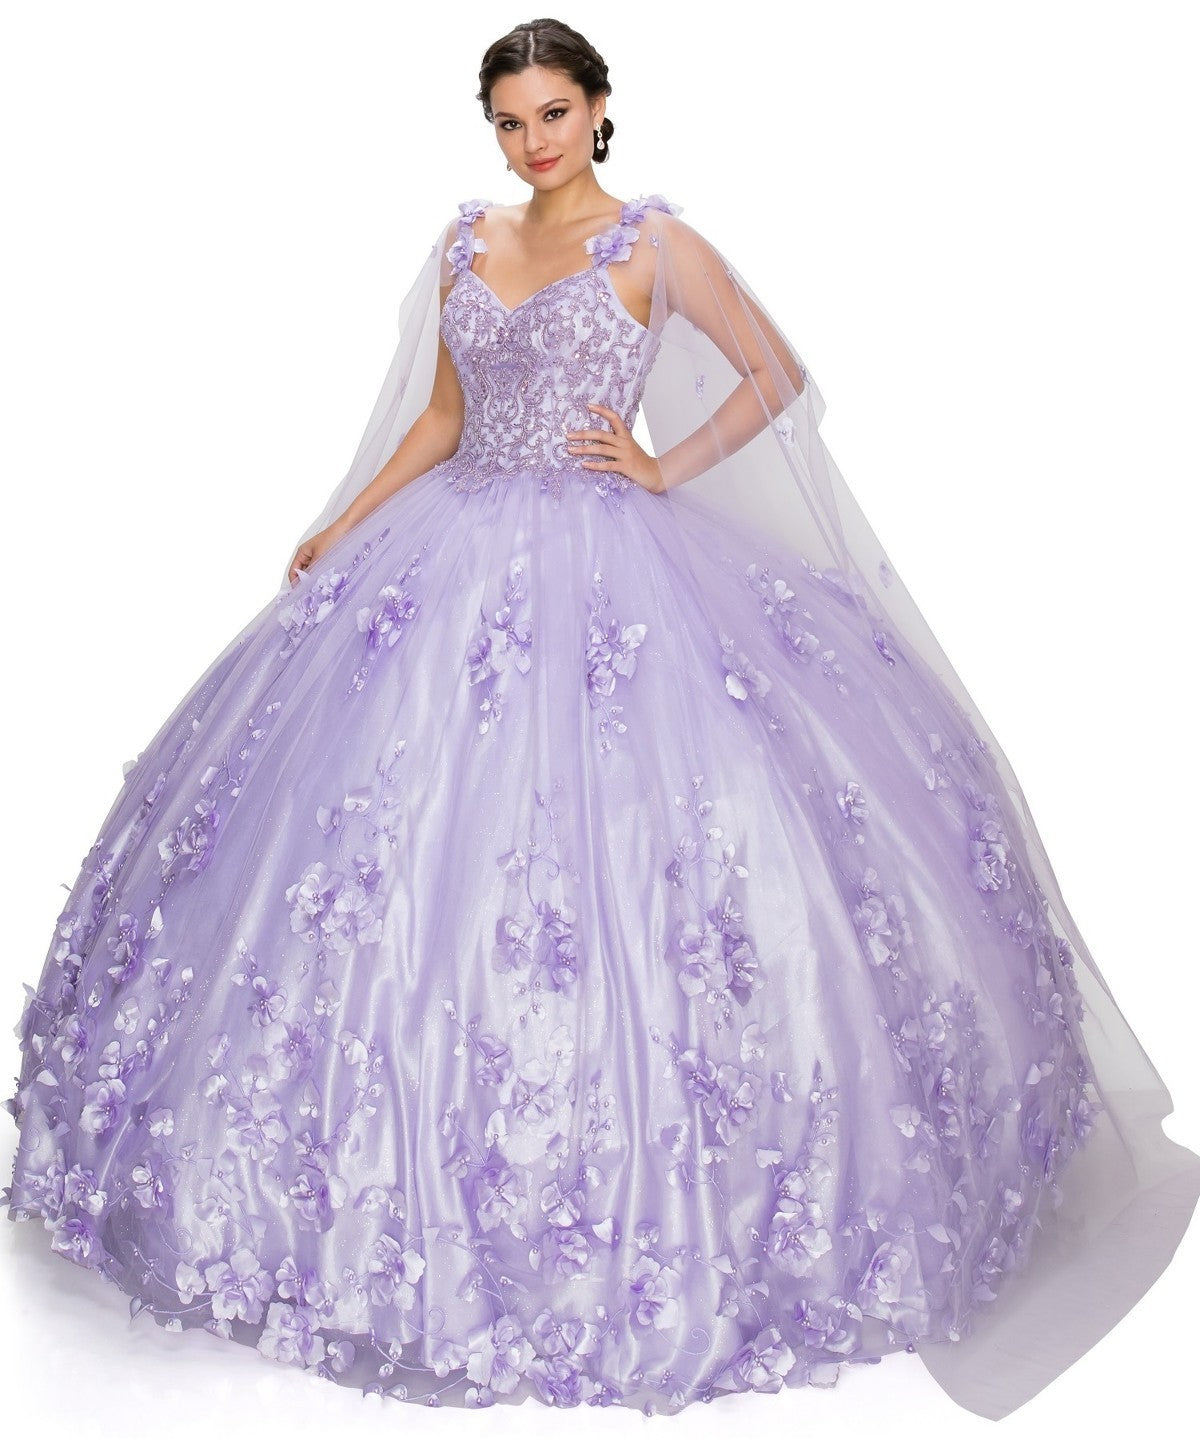 3D Stone/Pearl Embellishments floral Applique Quinceanera Dress by Cinderella Couture USA AS8030J